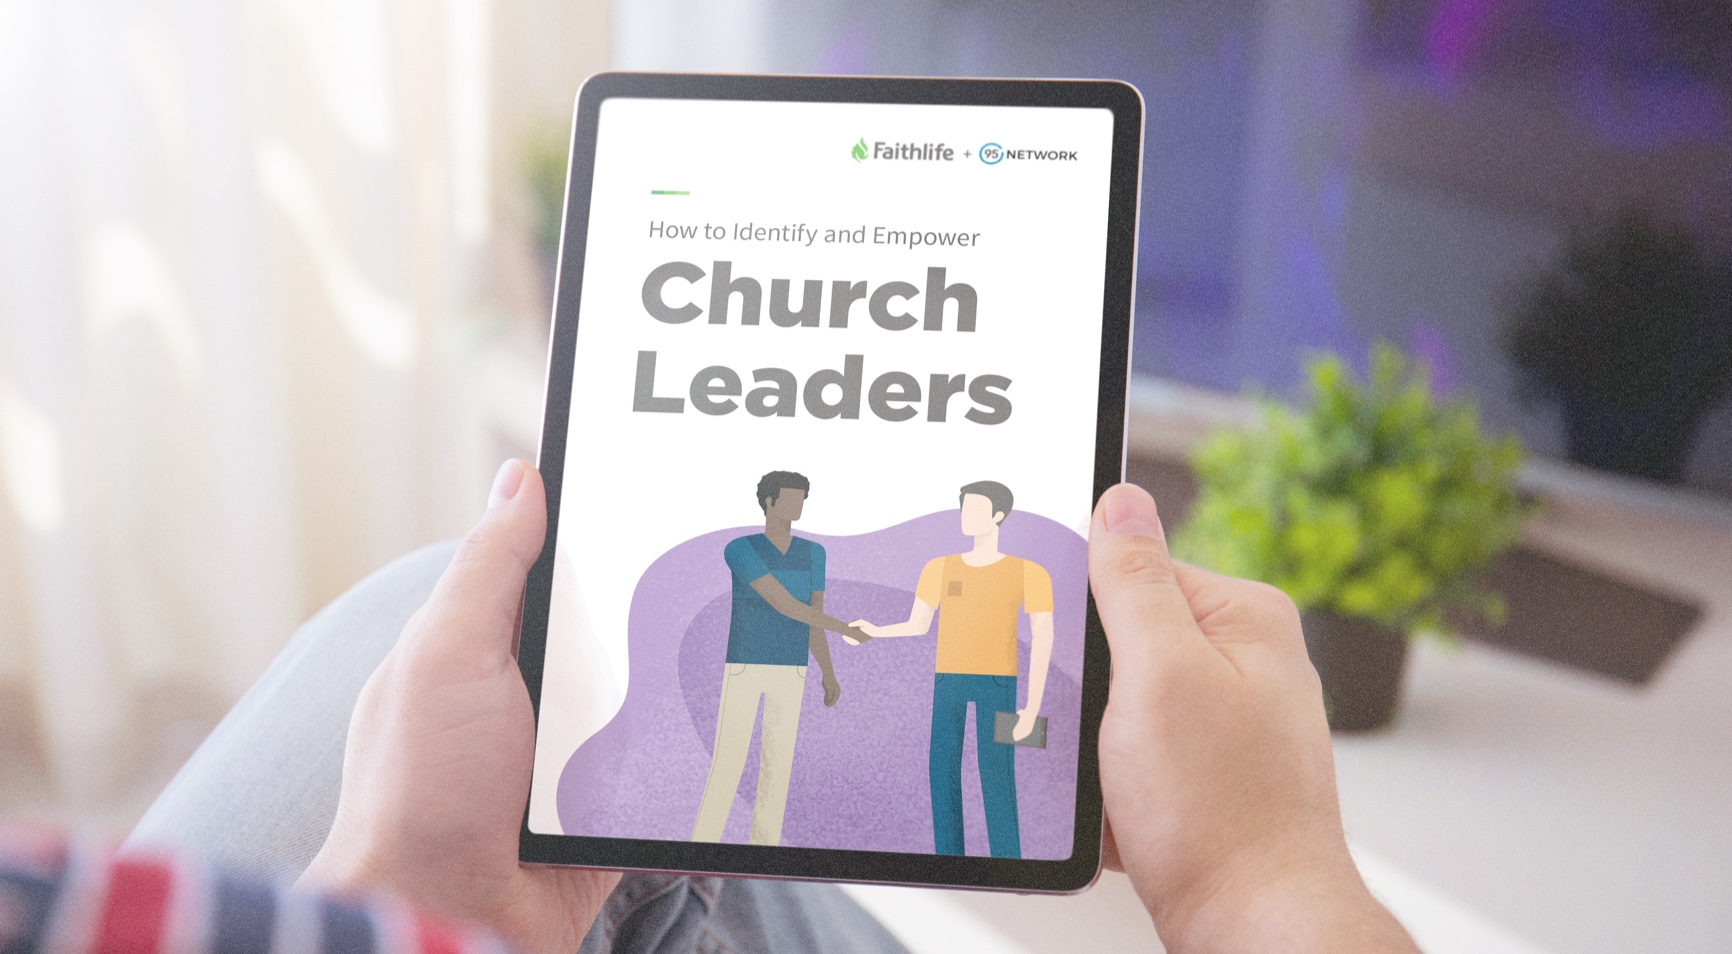 Thanks for Getting the Church Leadership Guide!